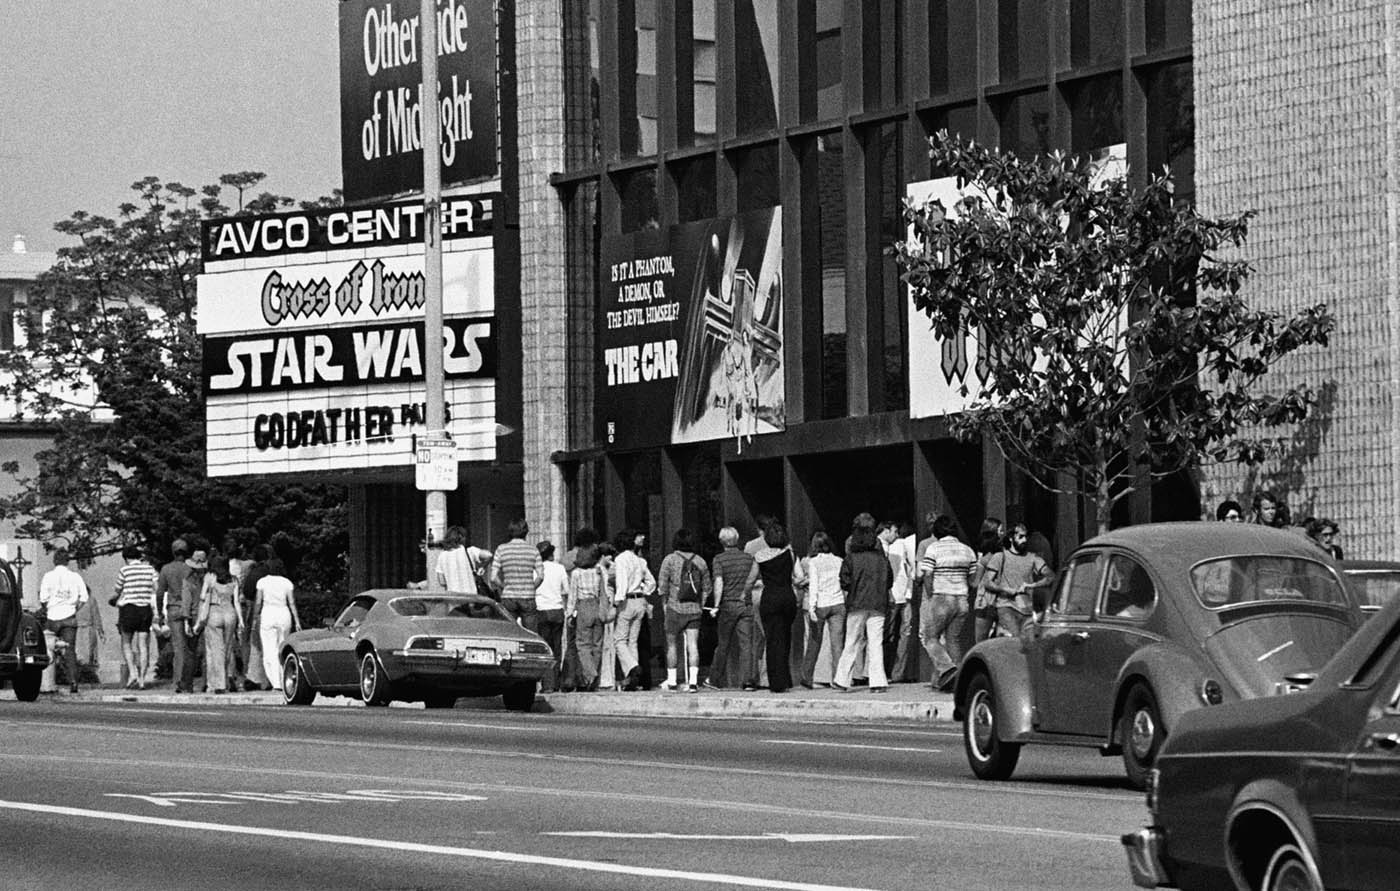 ** FILE ** In this June 7, 1977 file photo, theater goers wait in lines in front of the Avco Center Theater in Los Angeles to see "Star Wars." (AP Photo, file)